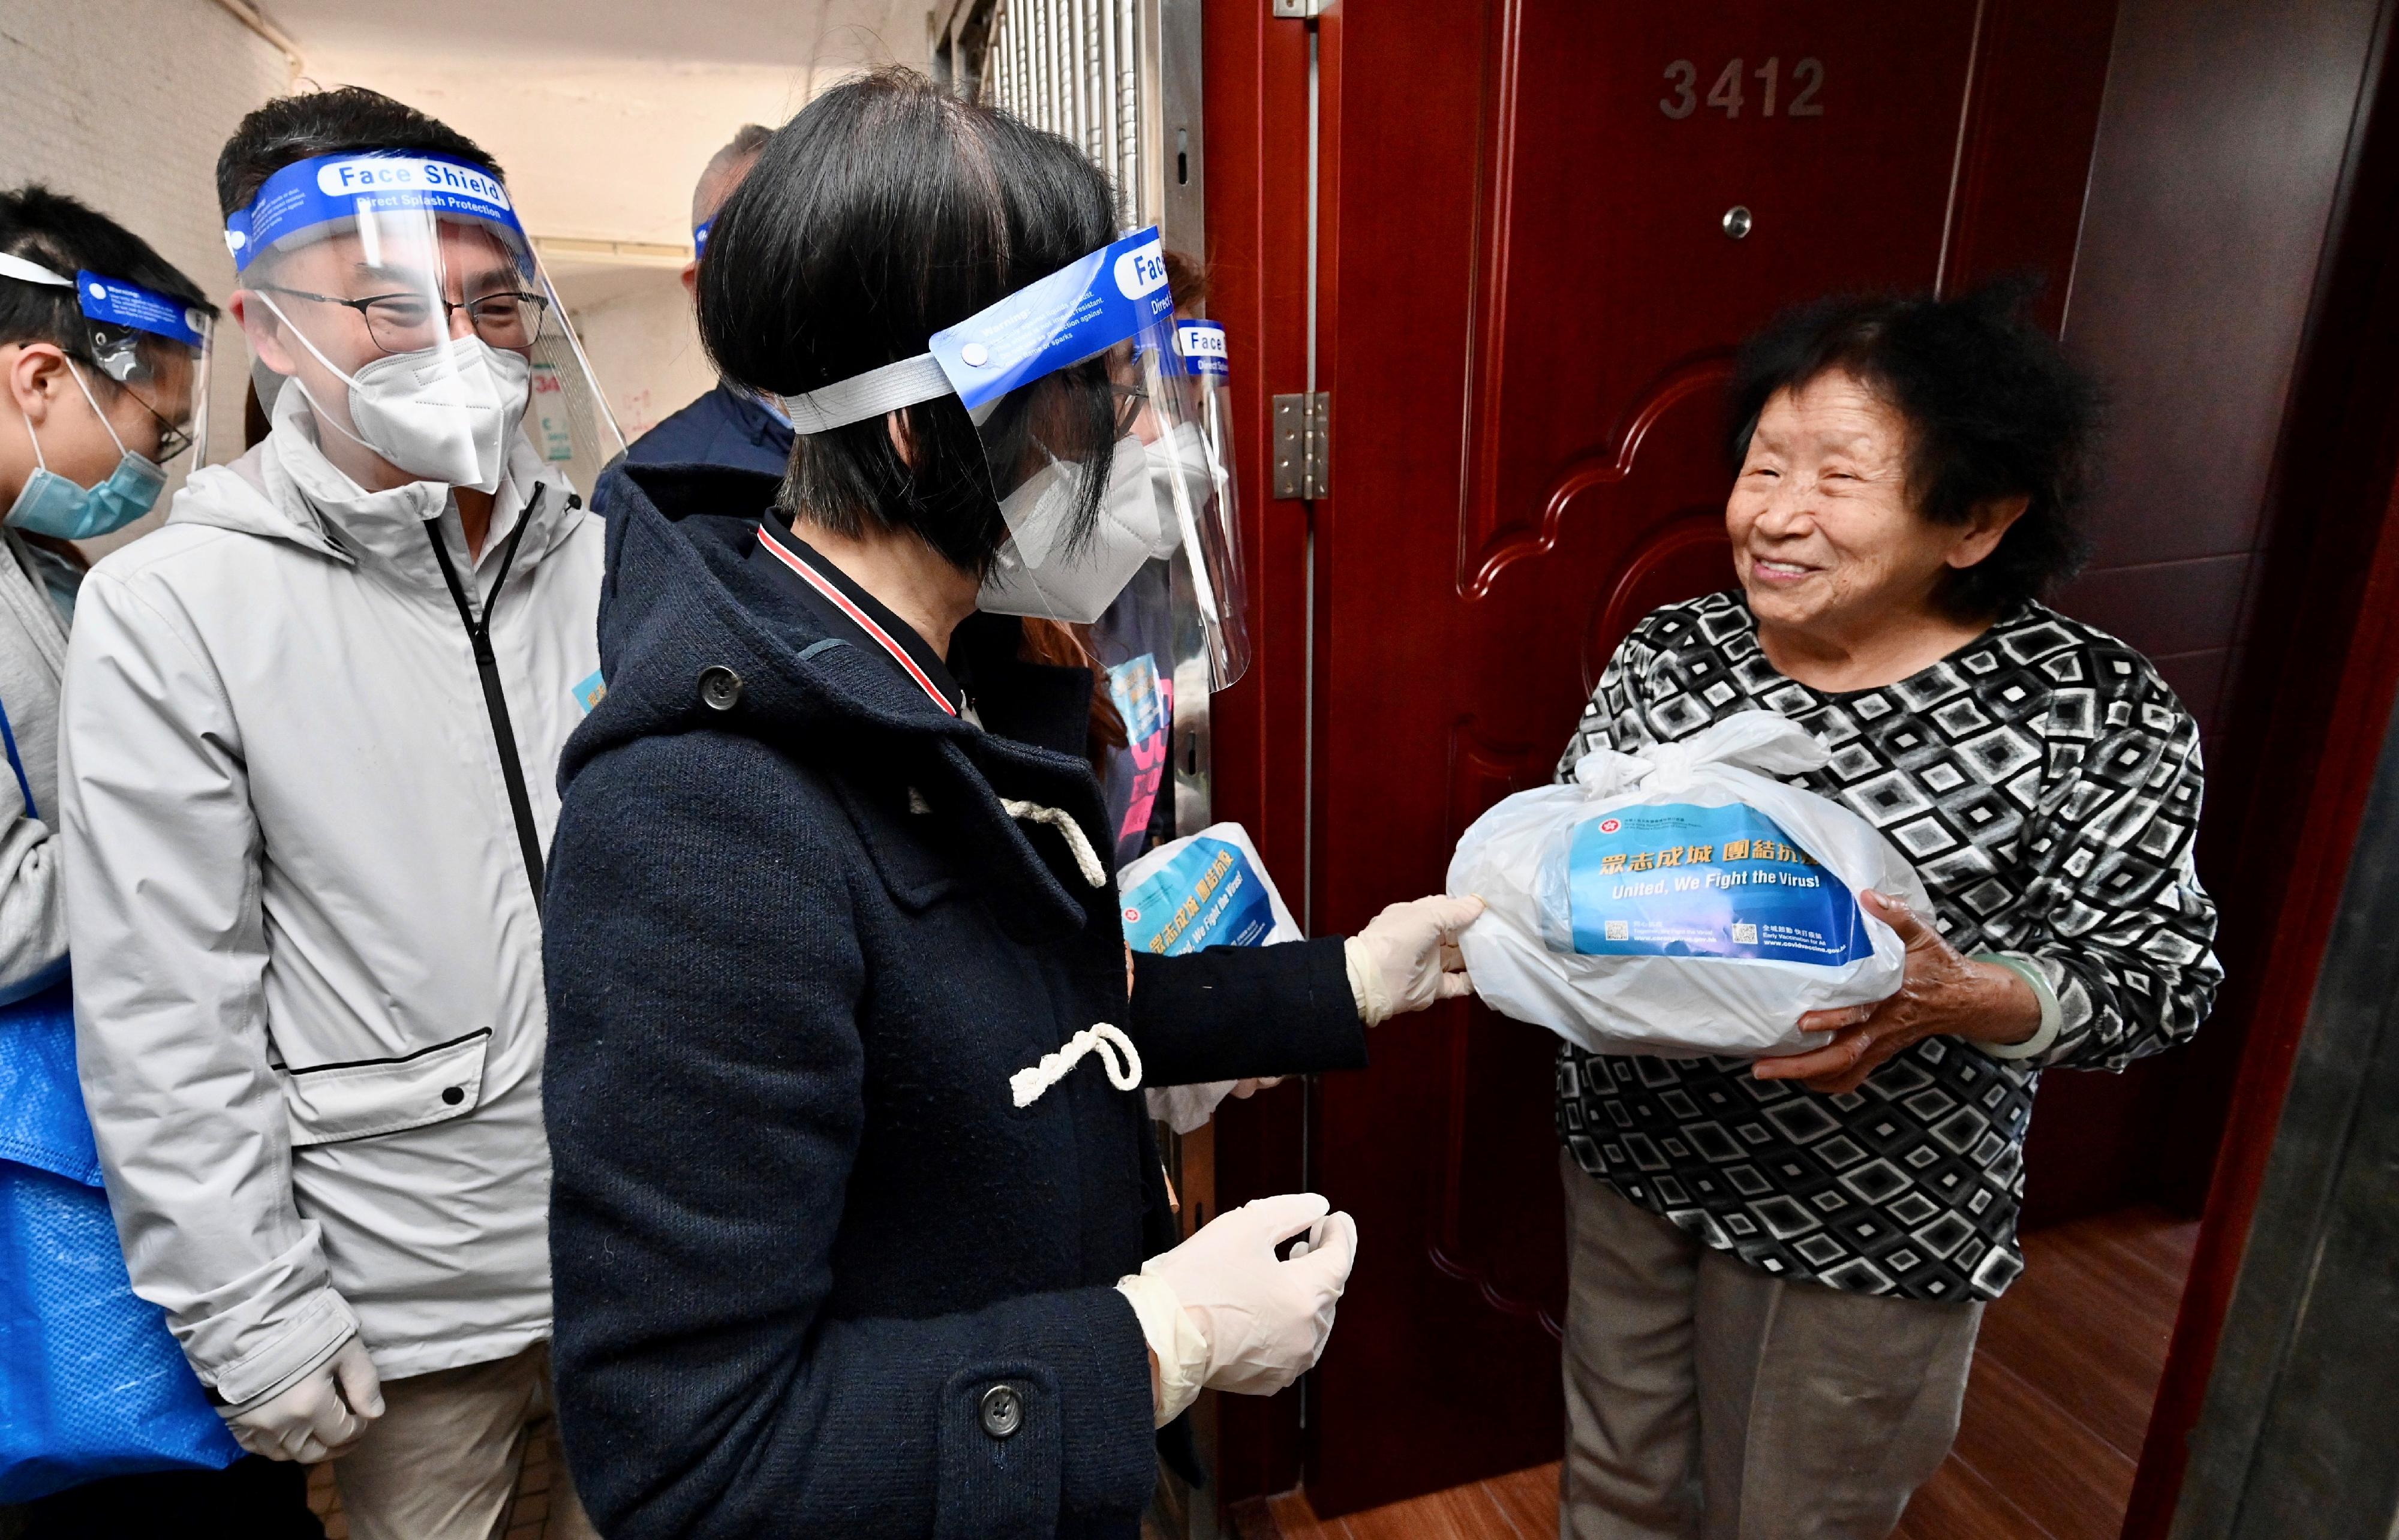 The Secretary for Food and Health, Professor Sophia Chan (centre), joined volunteers to distribute anti-epidemic service bags to residents at Kwong Yuen Estate in Sha Tin today (April 3). She expressed the hope that the distribution of service bags would help enhance people's anti-epidemic awareness and ability.

